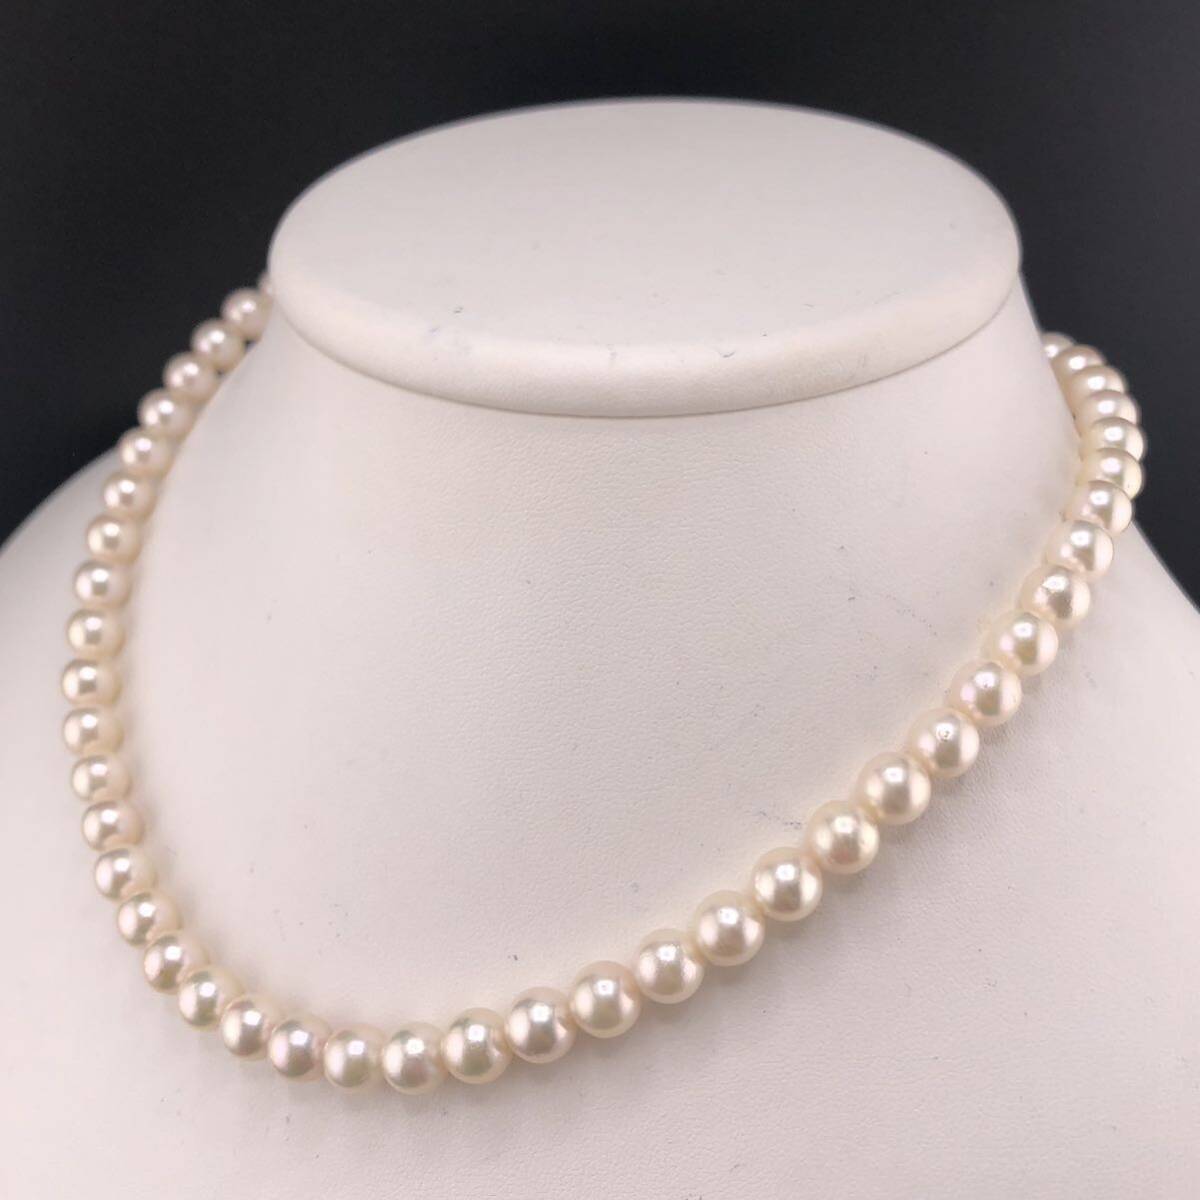 E04-4504☆ アコヤパールネックレス 7.0mm 40cm 32.9g ( アコヤ真珠 Pearl necklace SILVER )の画像2